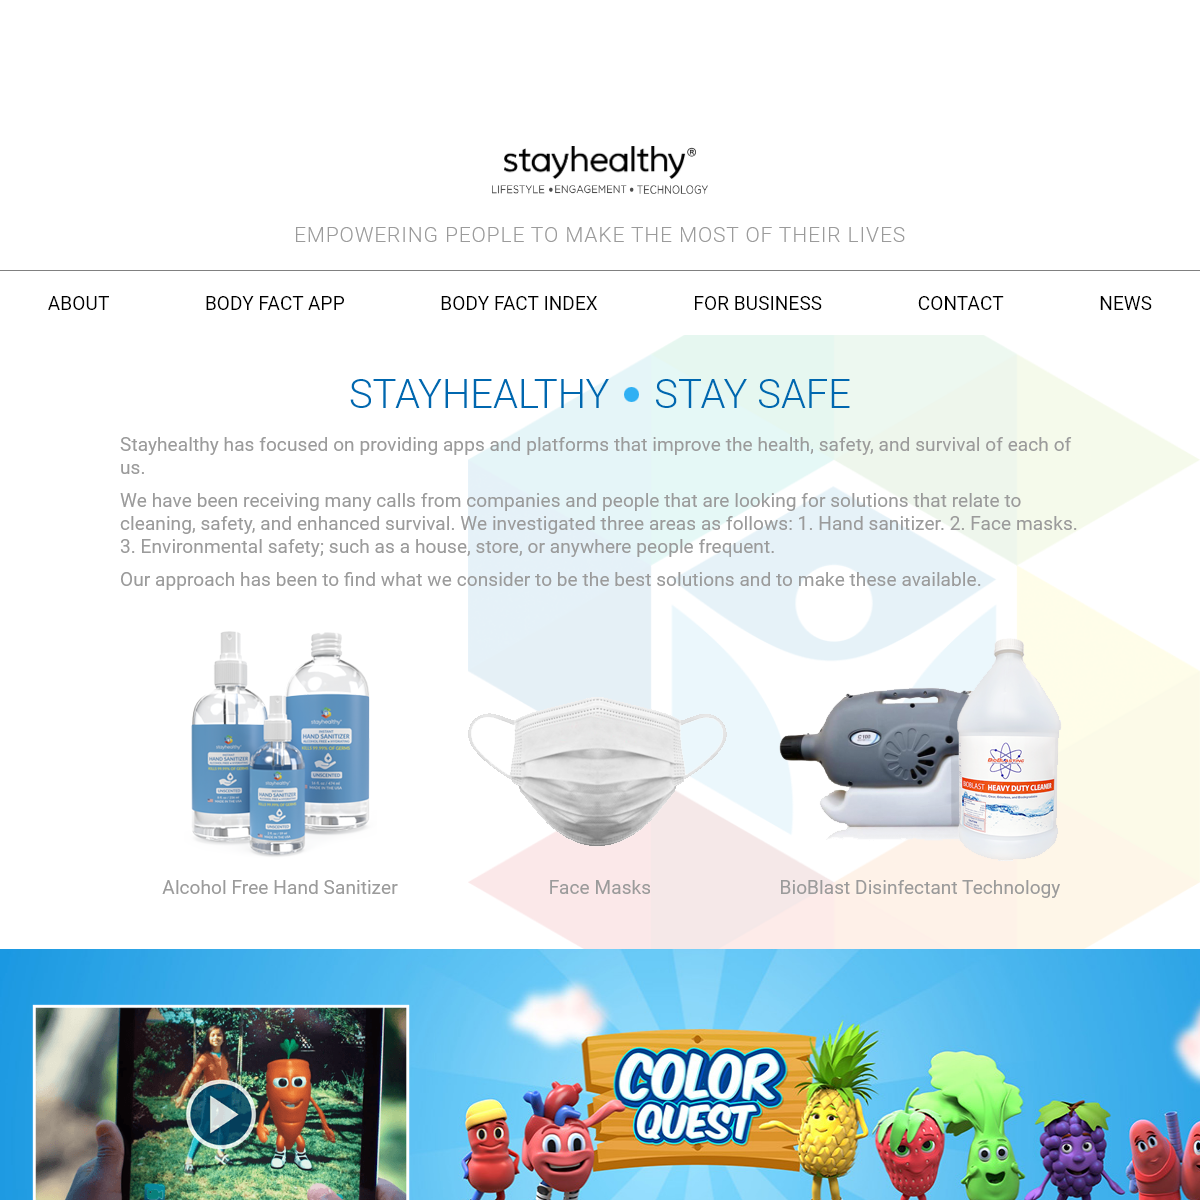 A complete backup of stayhealthy.com